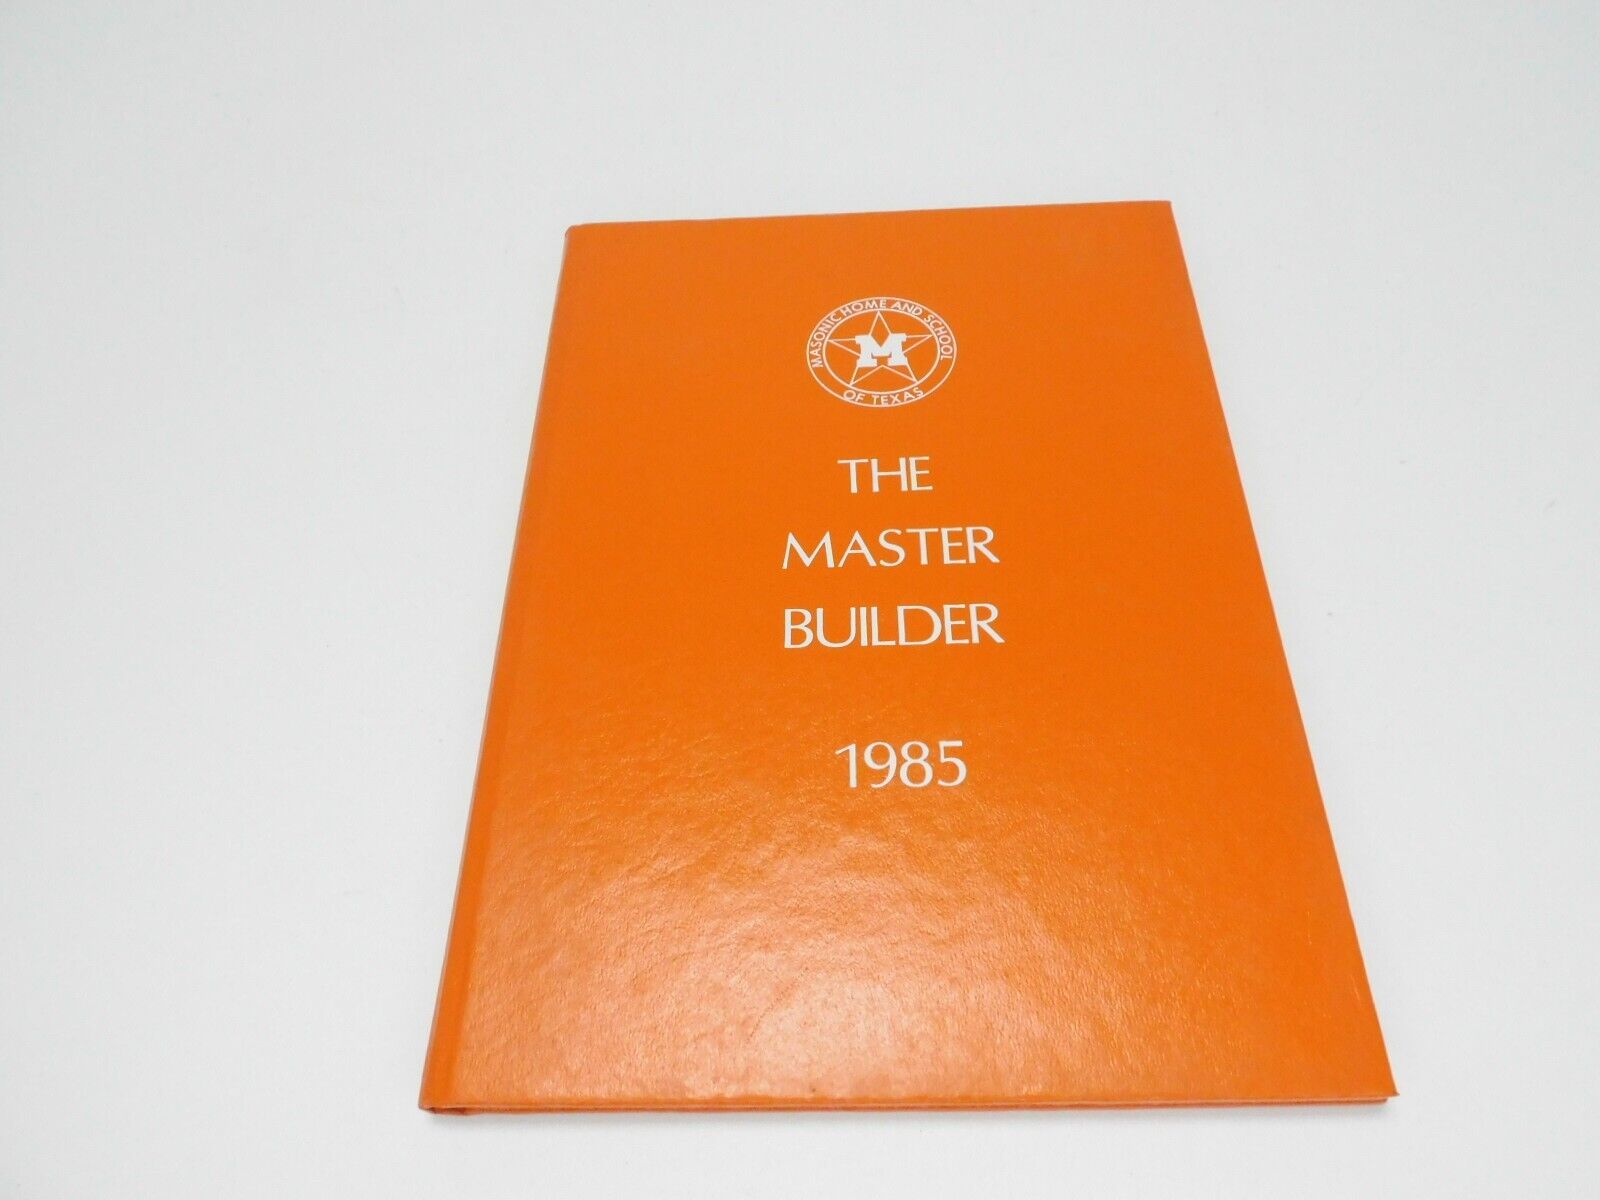 1985 Masonic Home and School Yearbook Ft. Worth Texas - The Master Builder Rare